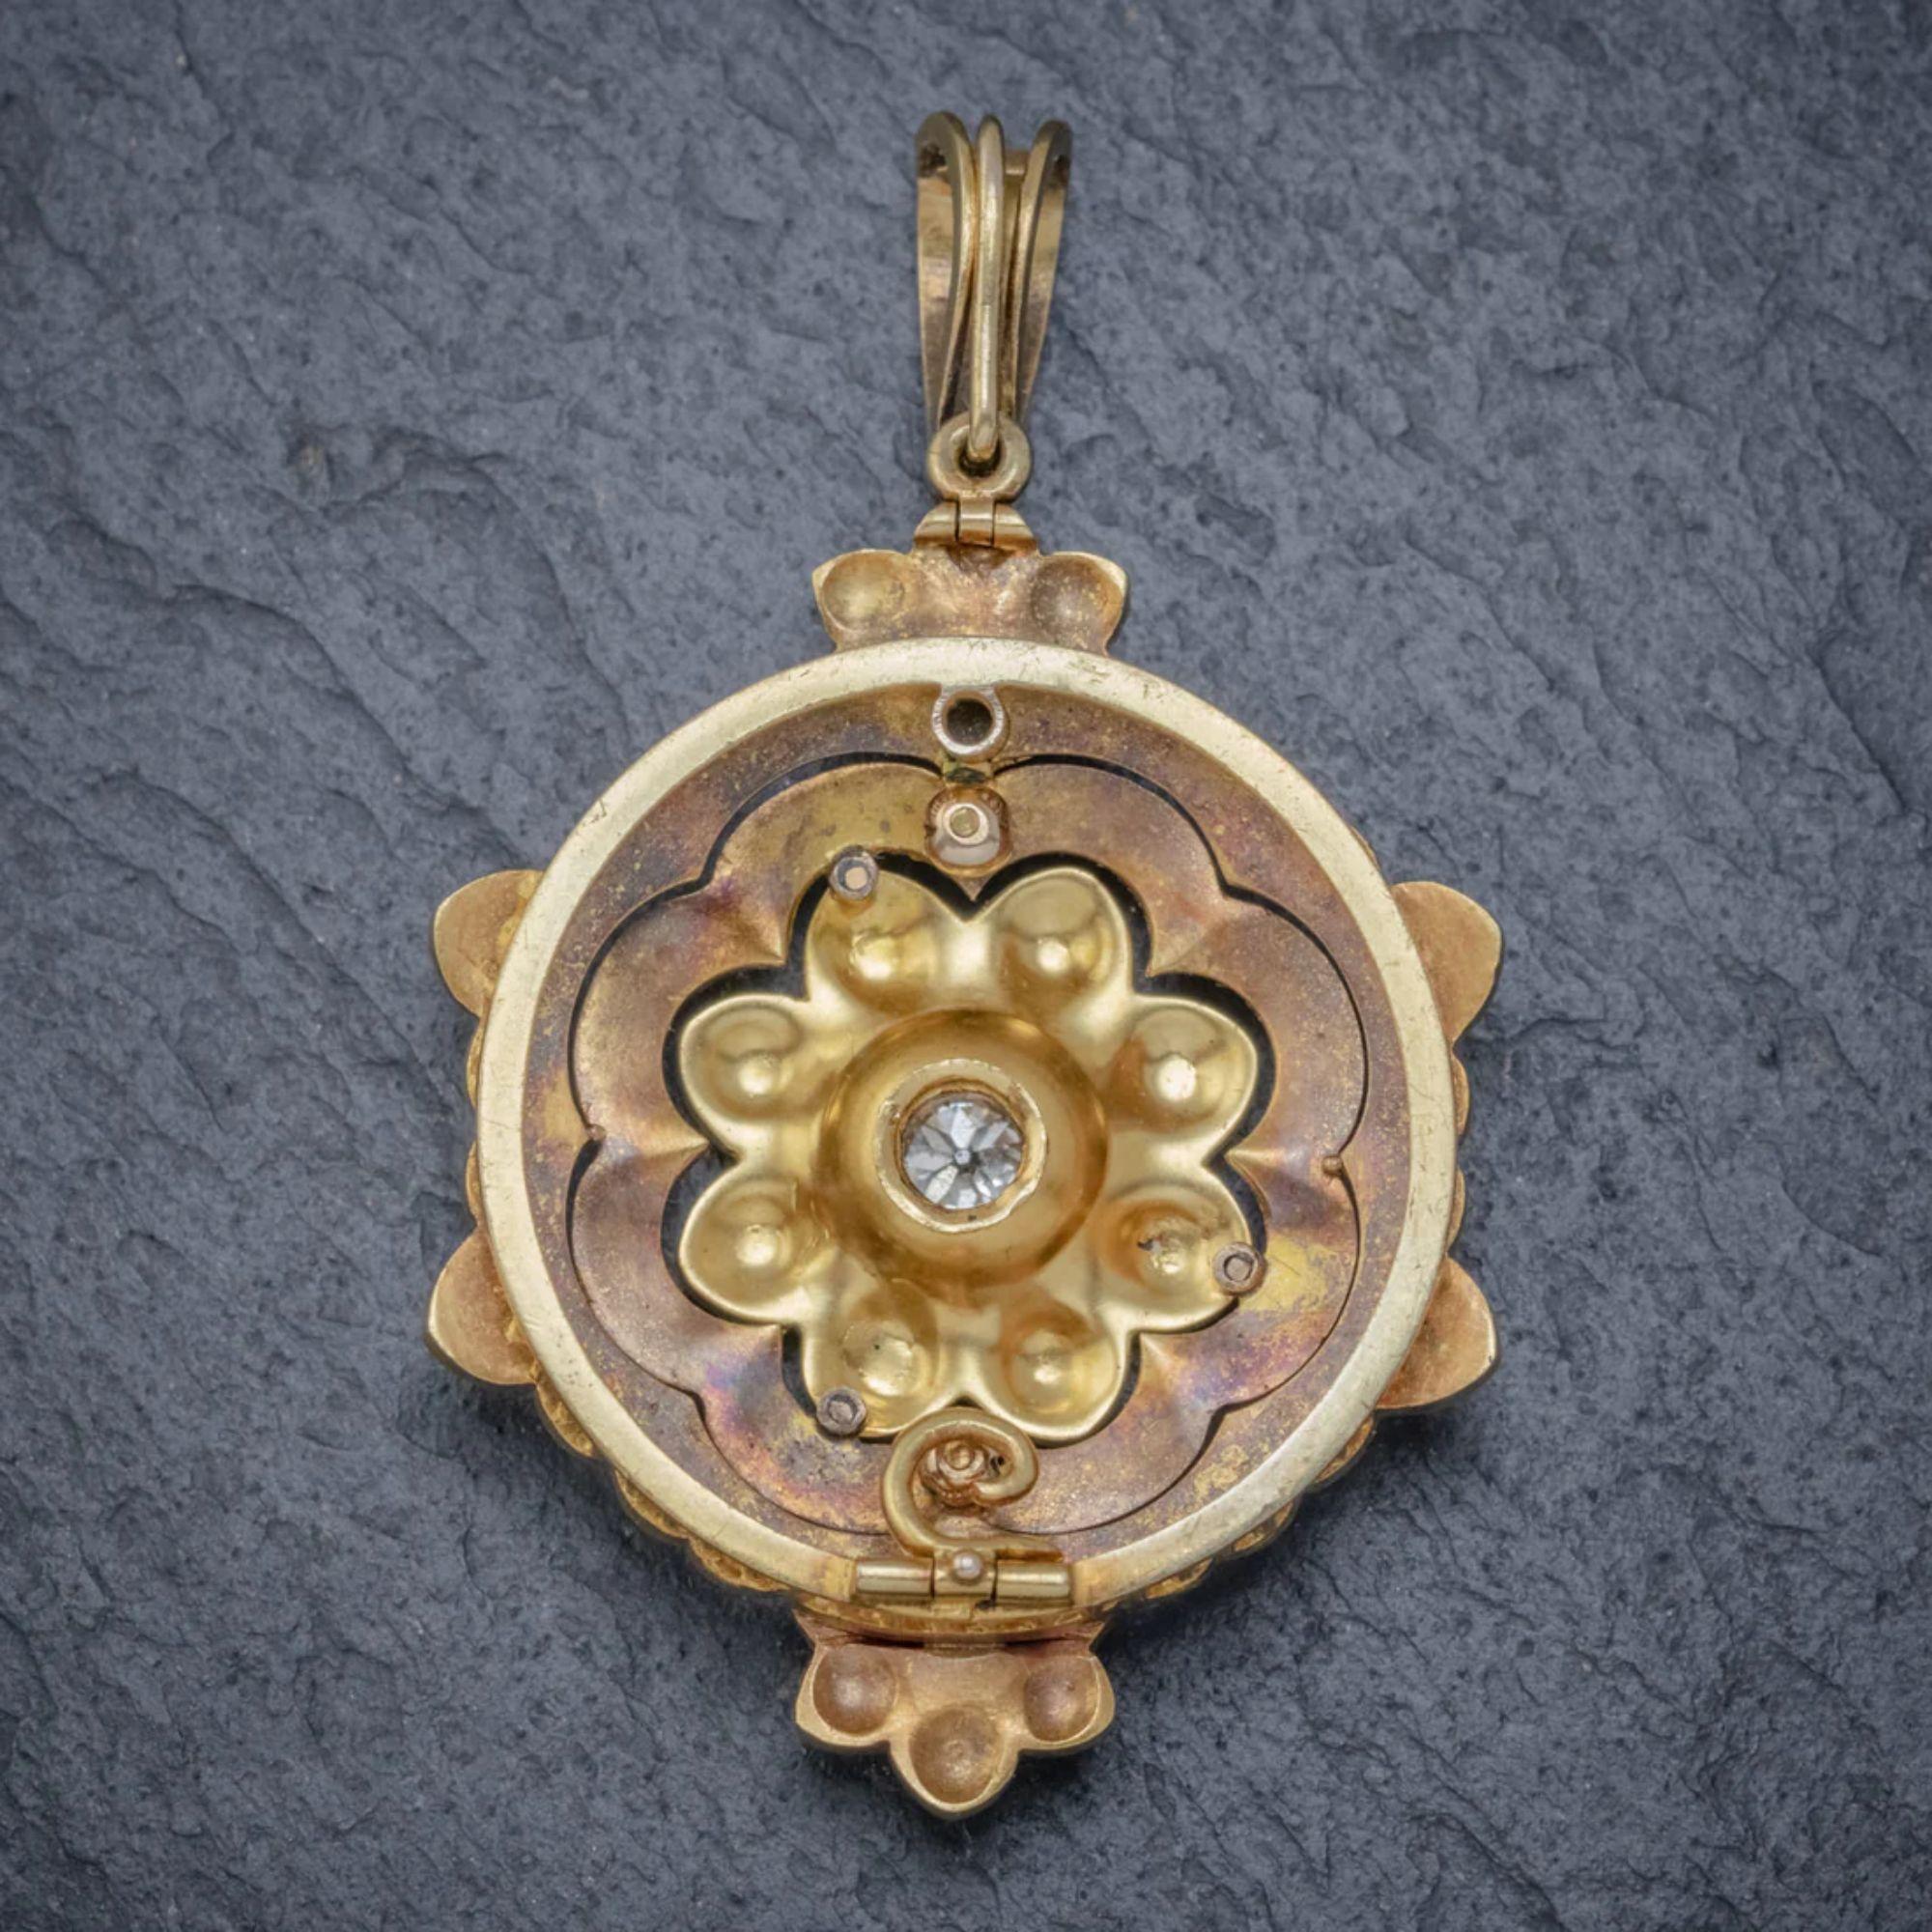 A remarkable antique flower pendant from the late Victorian era decorated with an abundance of lustrous, white pearls in various sizes and a 0.30ct old cushion cut diamond sparkling at its heart.

The gallery has been modelled expertly in solid 18ct